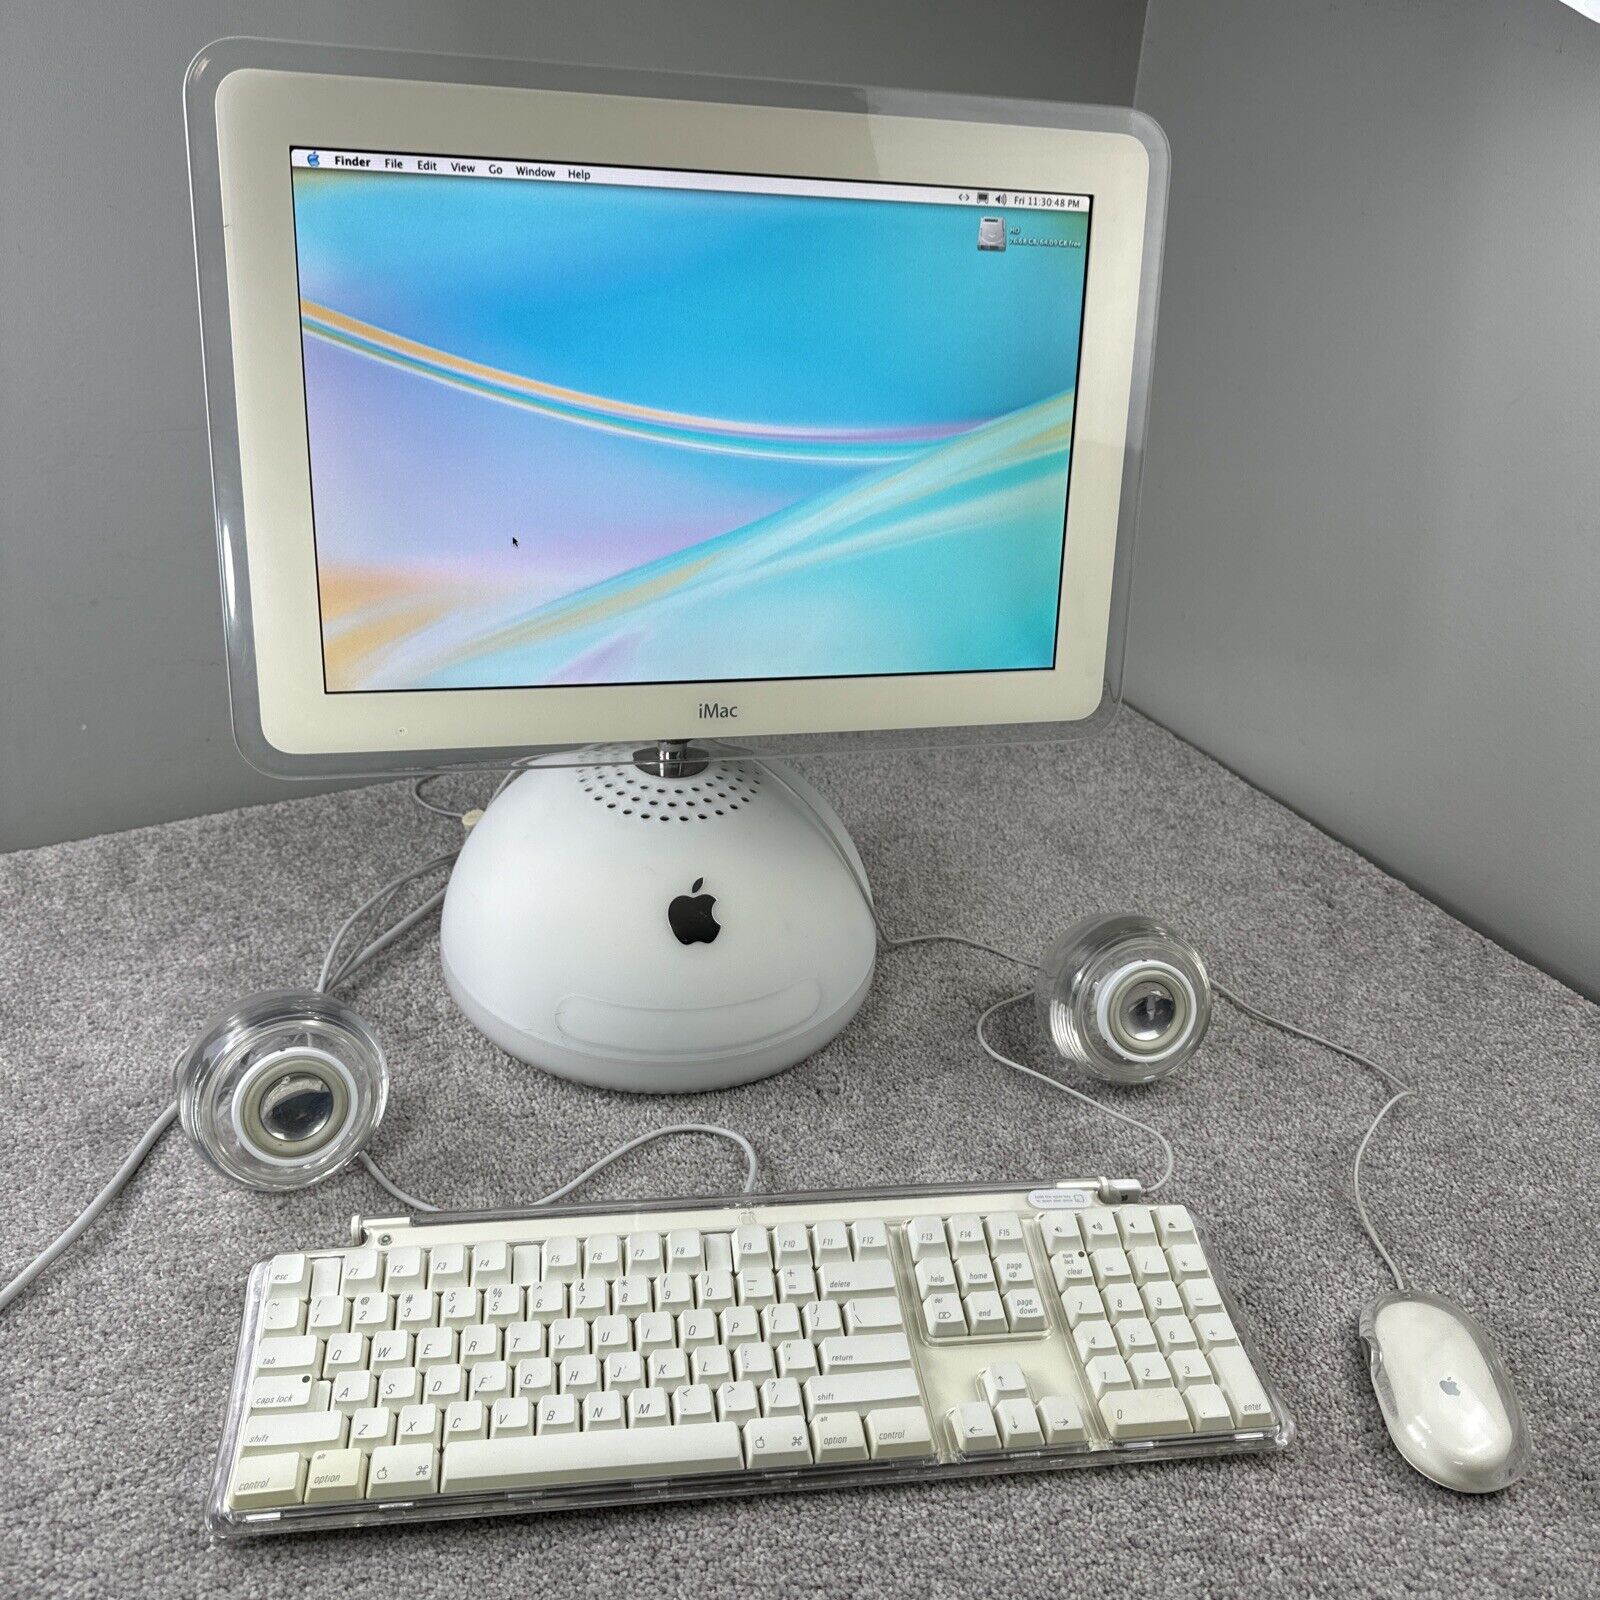 Apple iMac G4 1 GHz 256mb 80gb HD - CD player Keyboard Mouse Speakers OSX 10.2.3